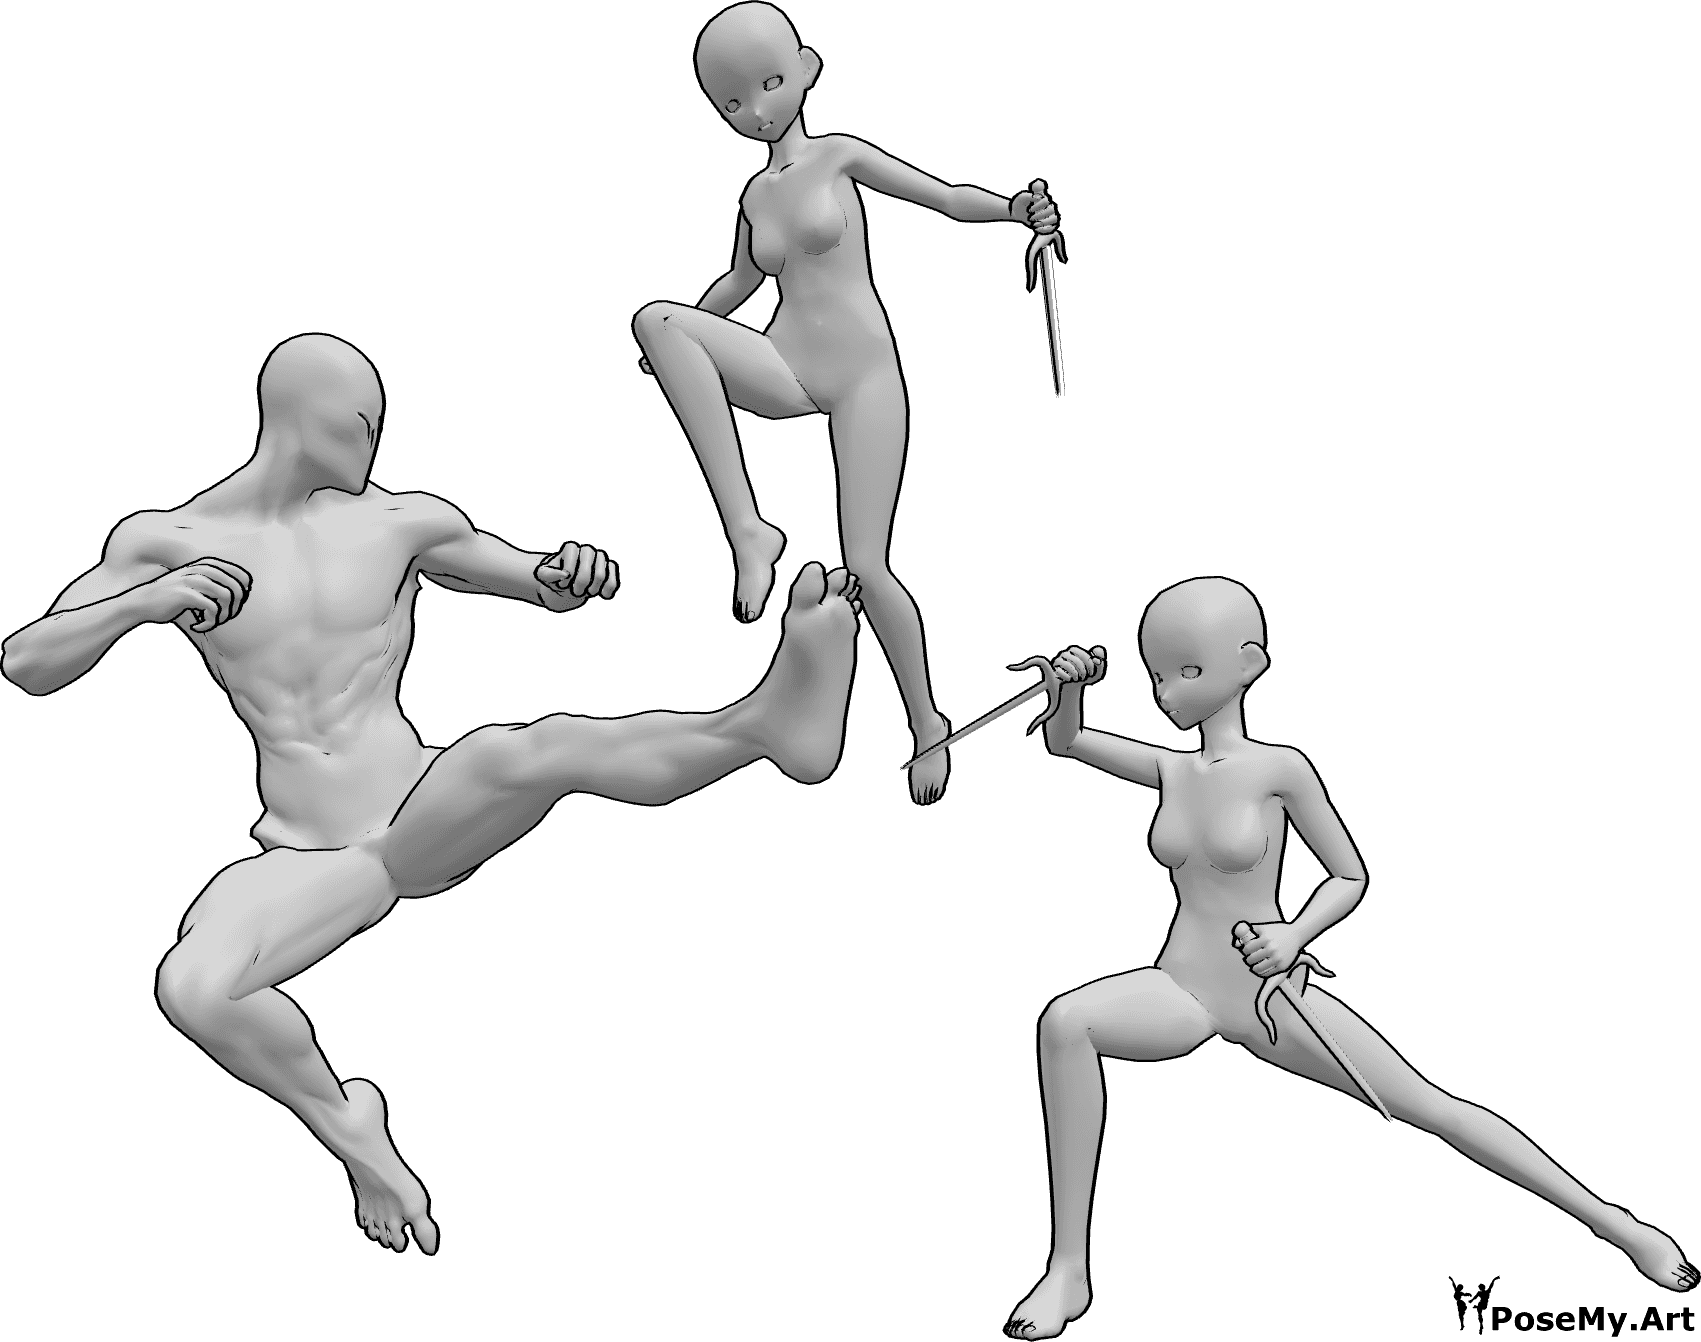 Pose Reference- Anime zombie fighting pose - Two anime females are fighting with a zombie, they are holding sais, the zombie is doing a side kick